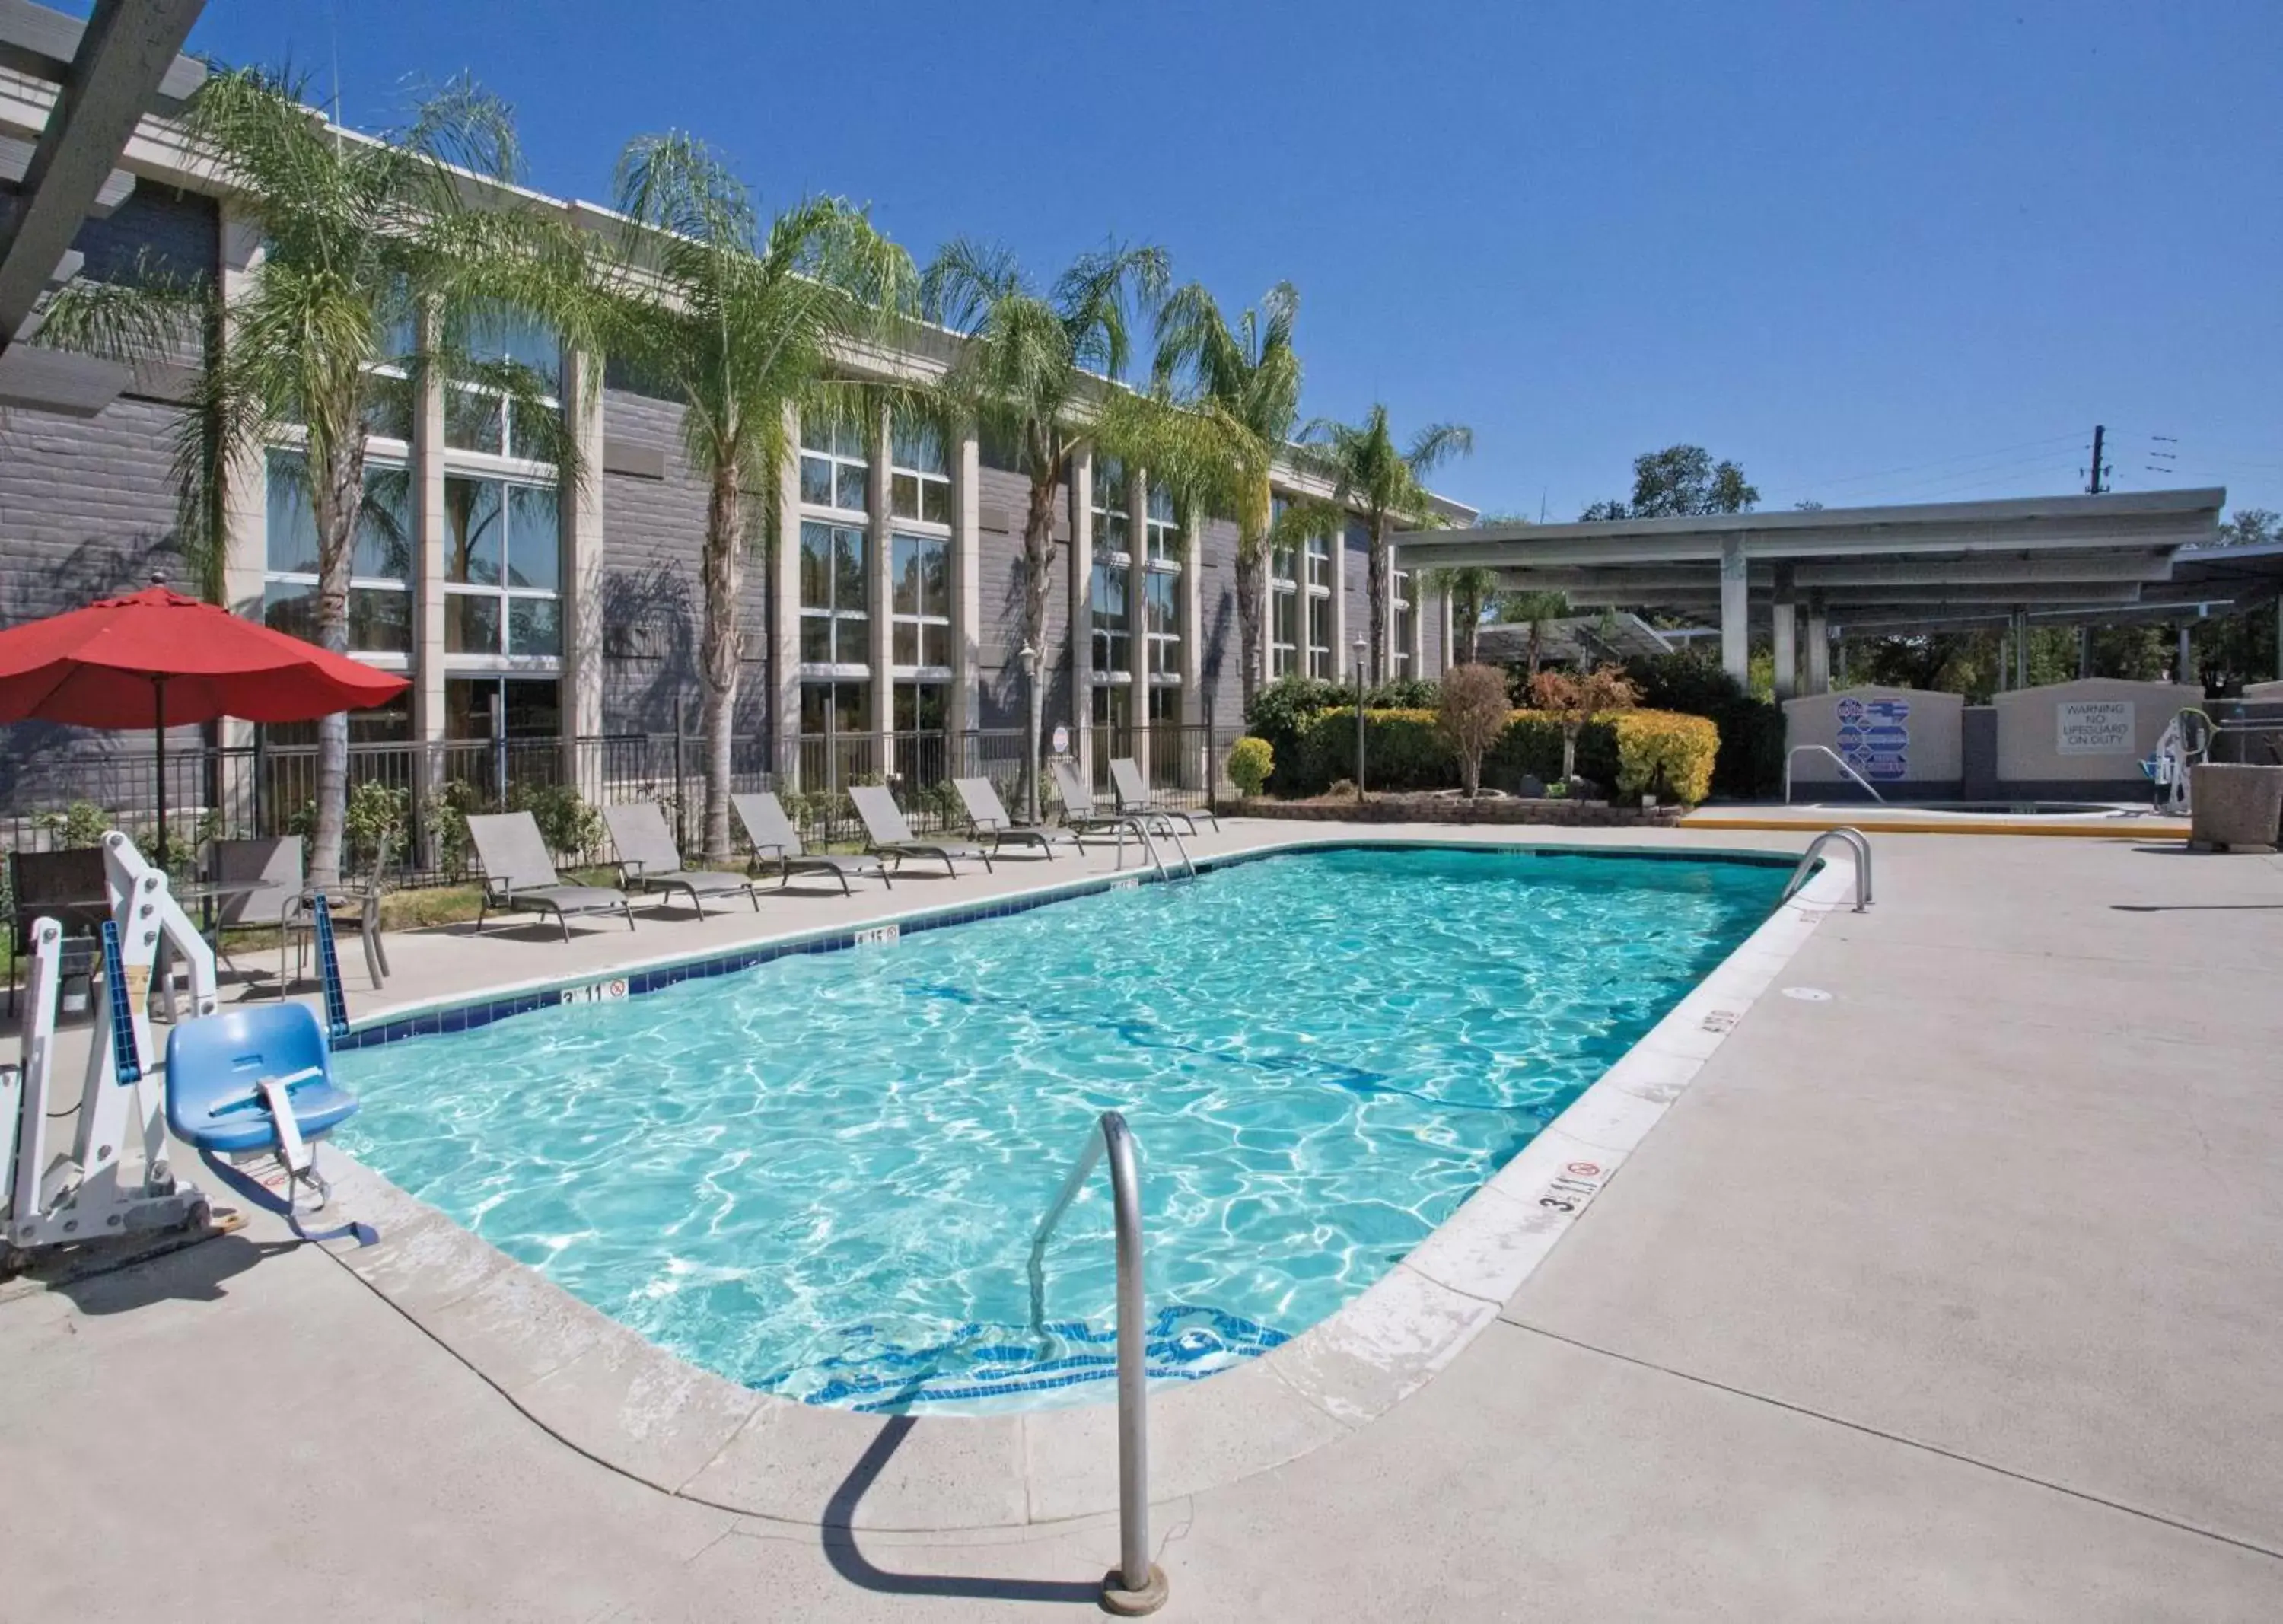 Pool view, Swimming Pool in Doubletree By Hilton Chico, Ca